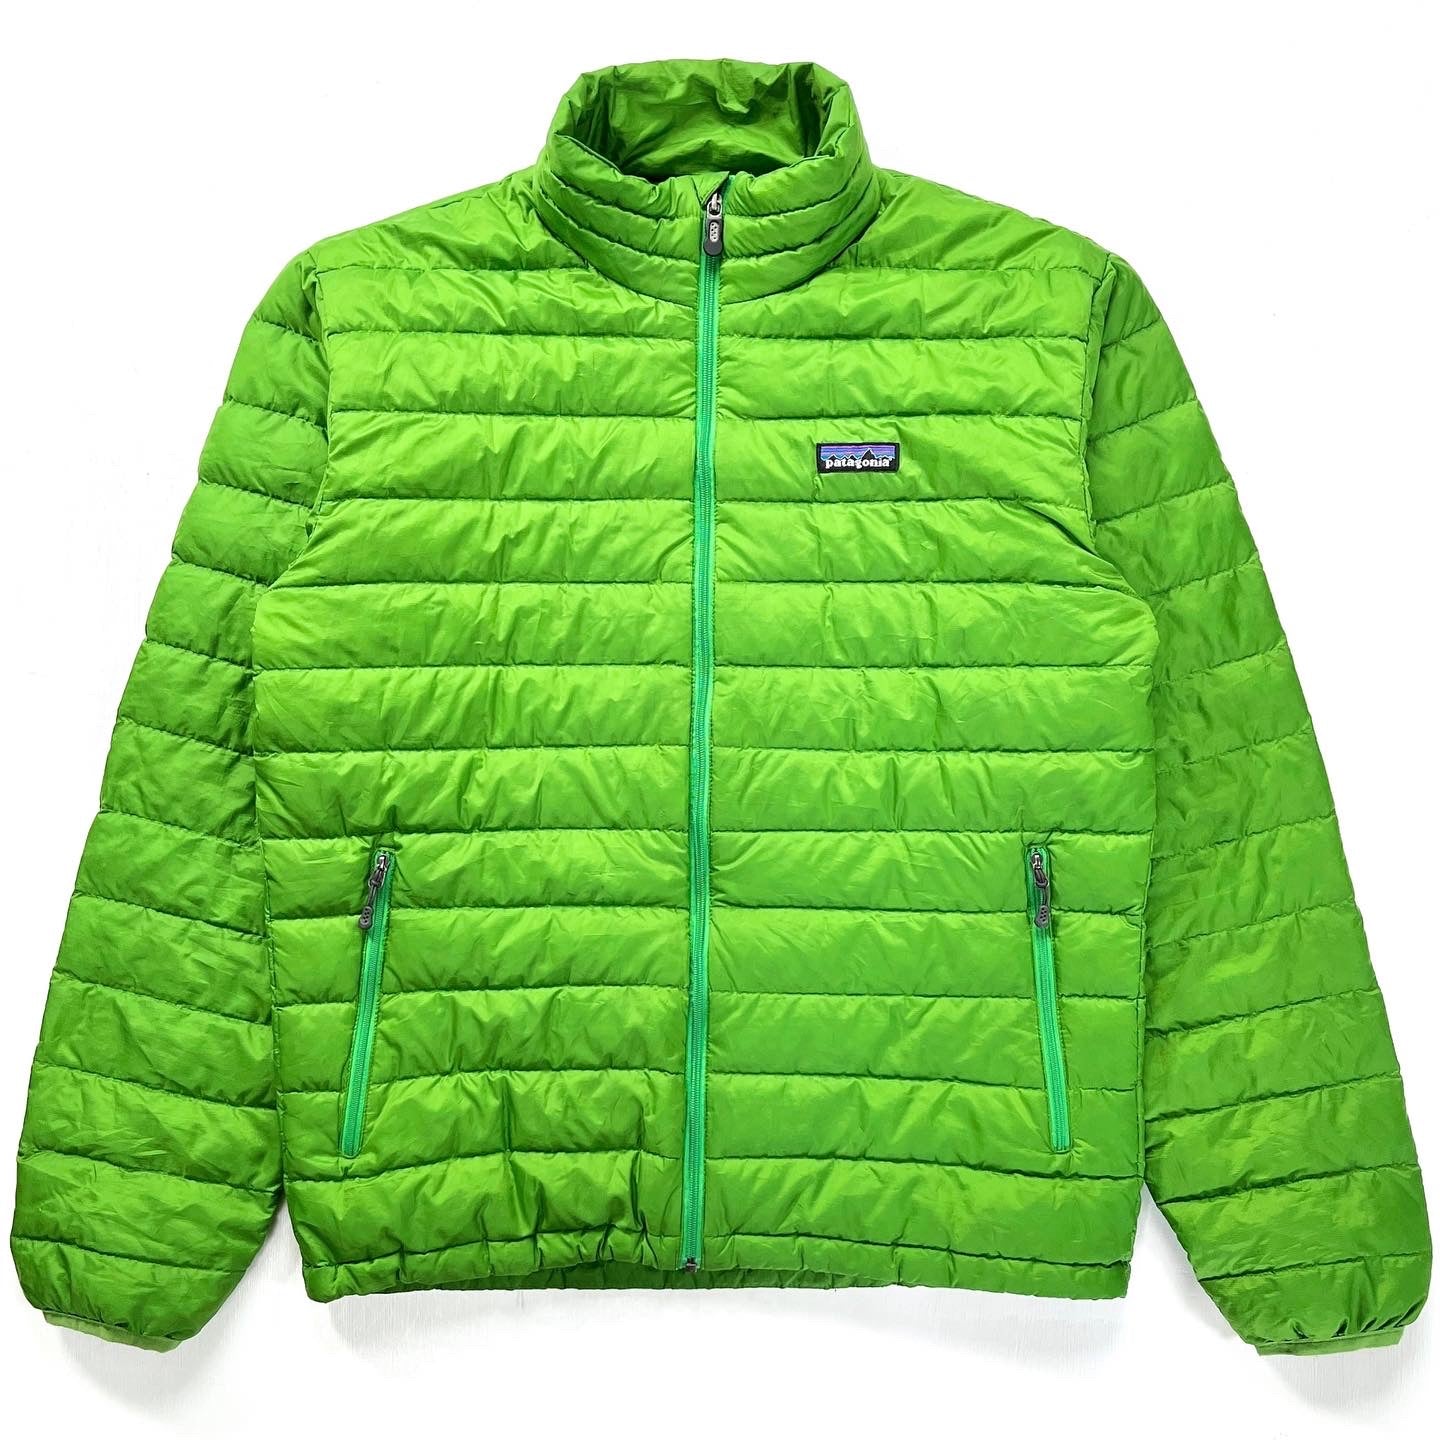 2011 Patagonia Mens Ultralight Down Jacket, Fennel Green (S)